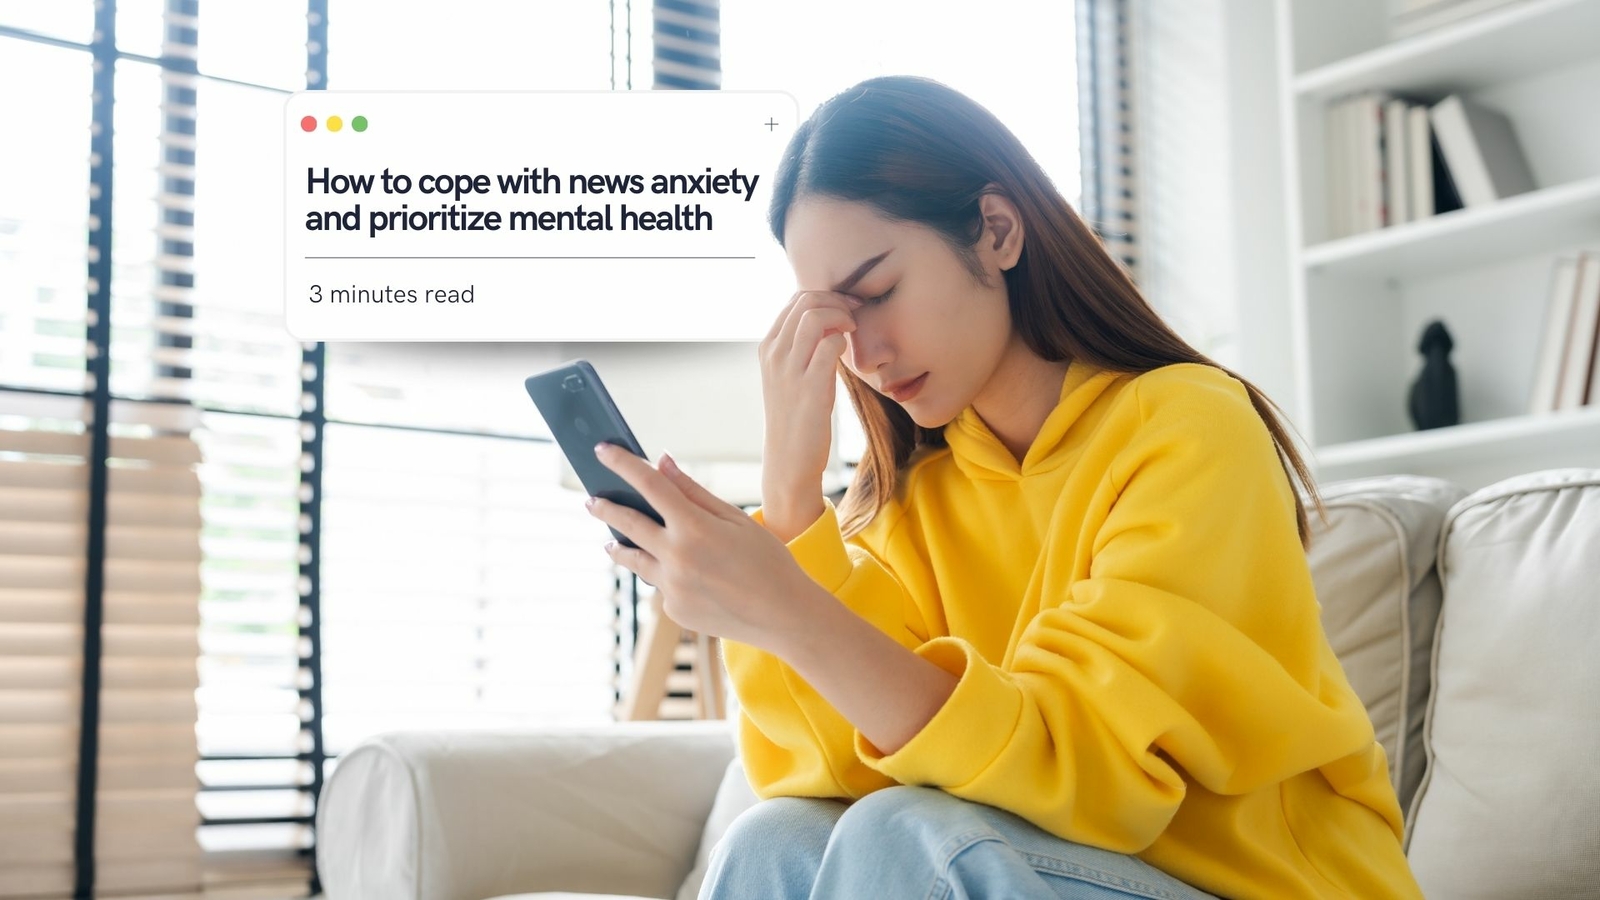 How to cope with news anxiety and prioritize mental health